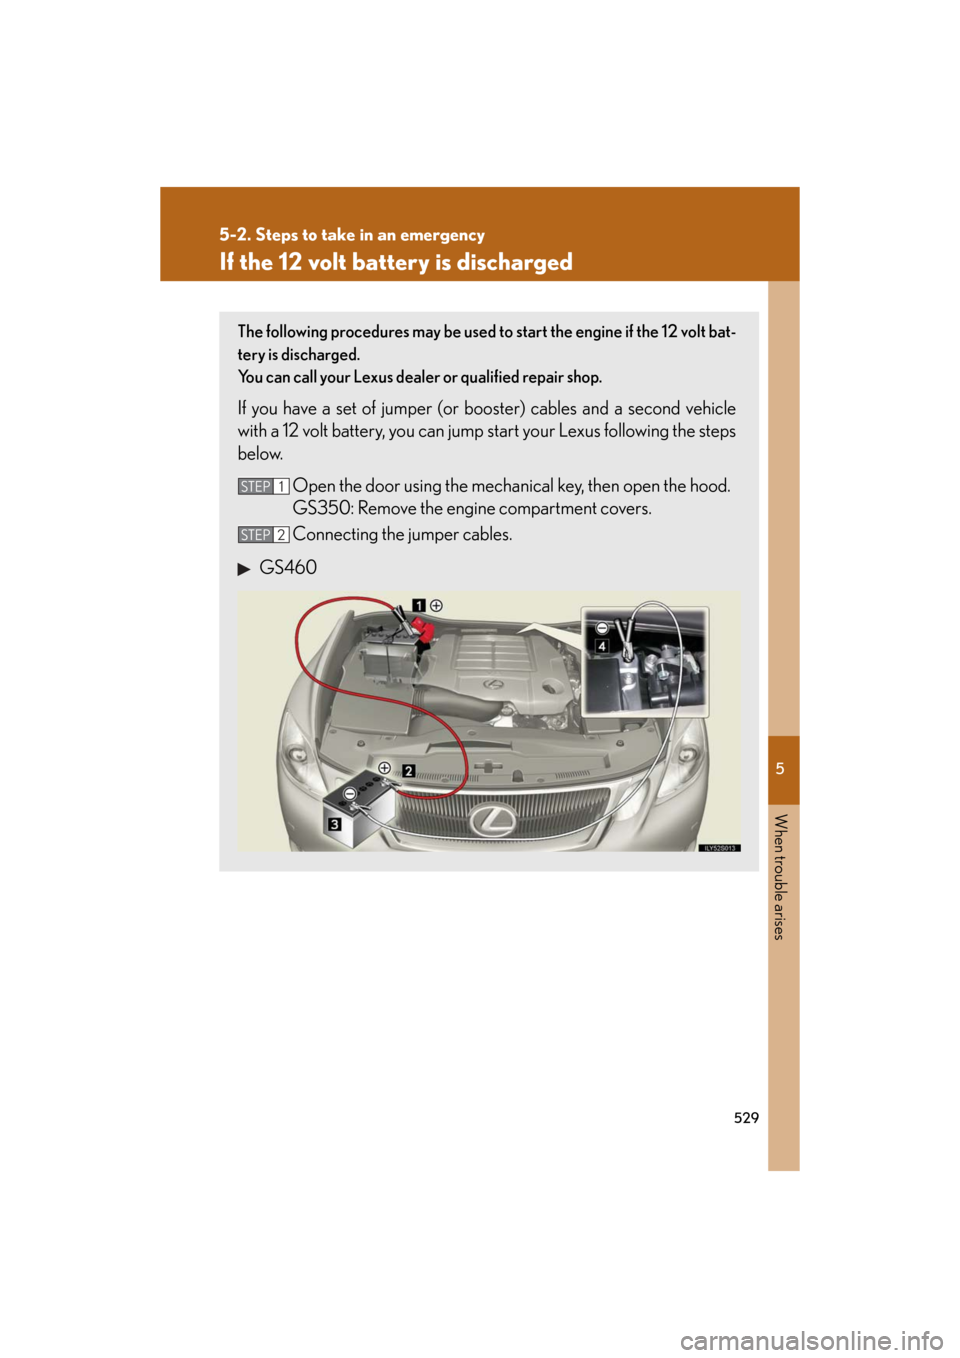 Lexus GS350 2008  Do-it-yourself maintenance / LEXUS 2008 GS460/350  (OM30A87U) User Guide 5
When trouble arises
529
5-2. Steps to take in an emergency
GS_G_U
May 13, 2008 5:14 pm
If the 12 volt battery is discharged
The following procedures may be used to start the engine if the 12 volt ba